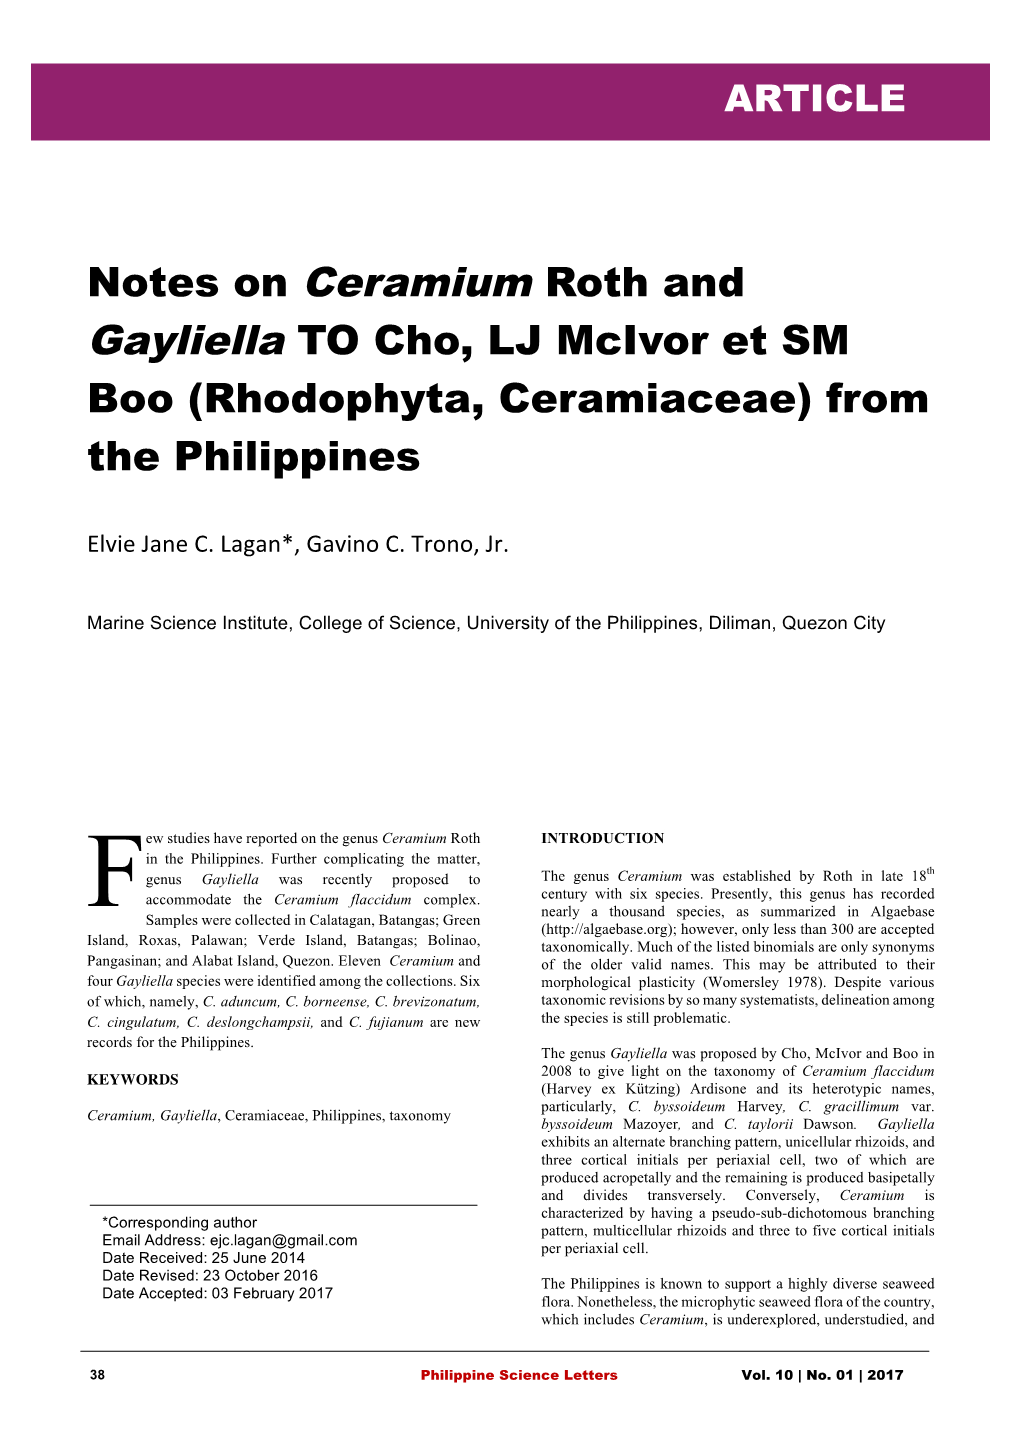 Notes on Ceramium Roth and Gayliella to Cho, LJ Mcivor Et SM Boo (Rhodophyta, Ceramiaceae) from the Philippines